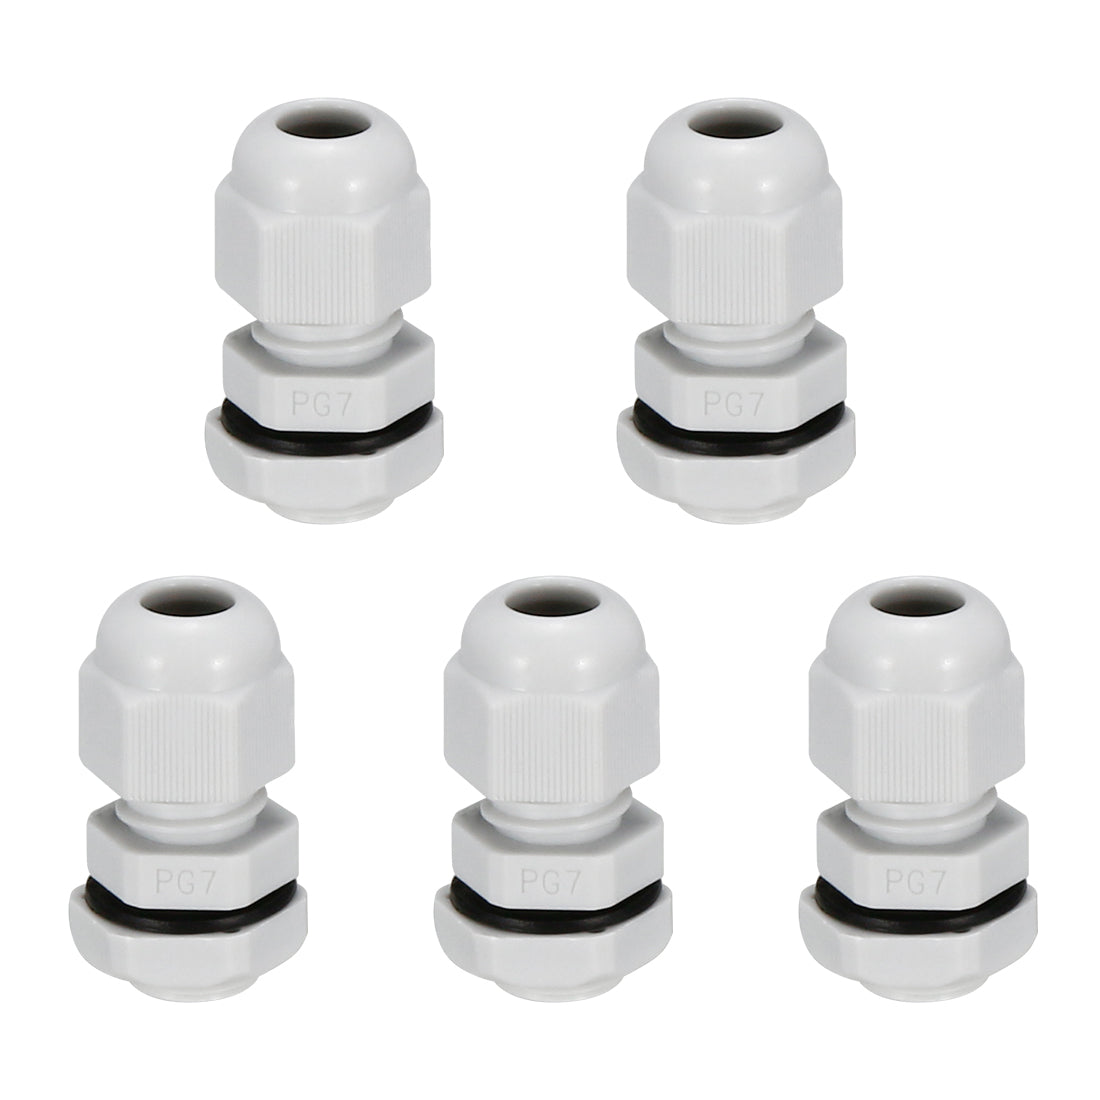 uxcell Uxcell 5Pcs PG7 Cable Gland Waterproof Plastic Joint Adjustable Locknut White for 3mm-6.5mm Dia Cable Wire